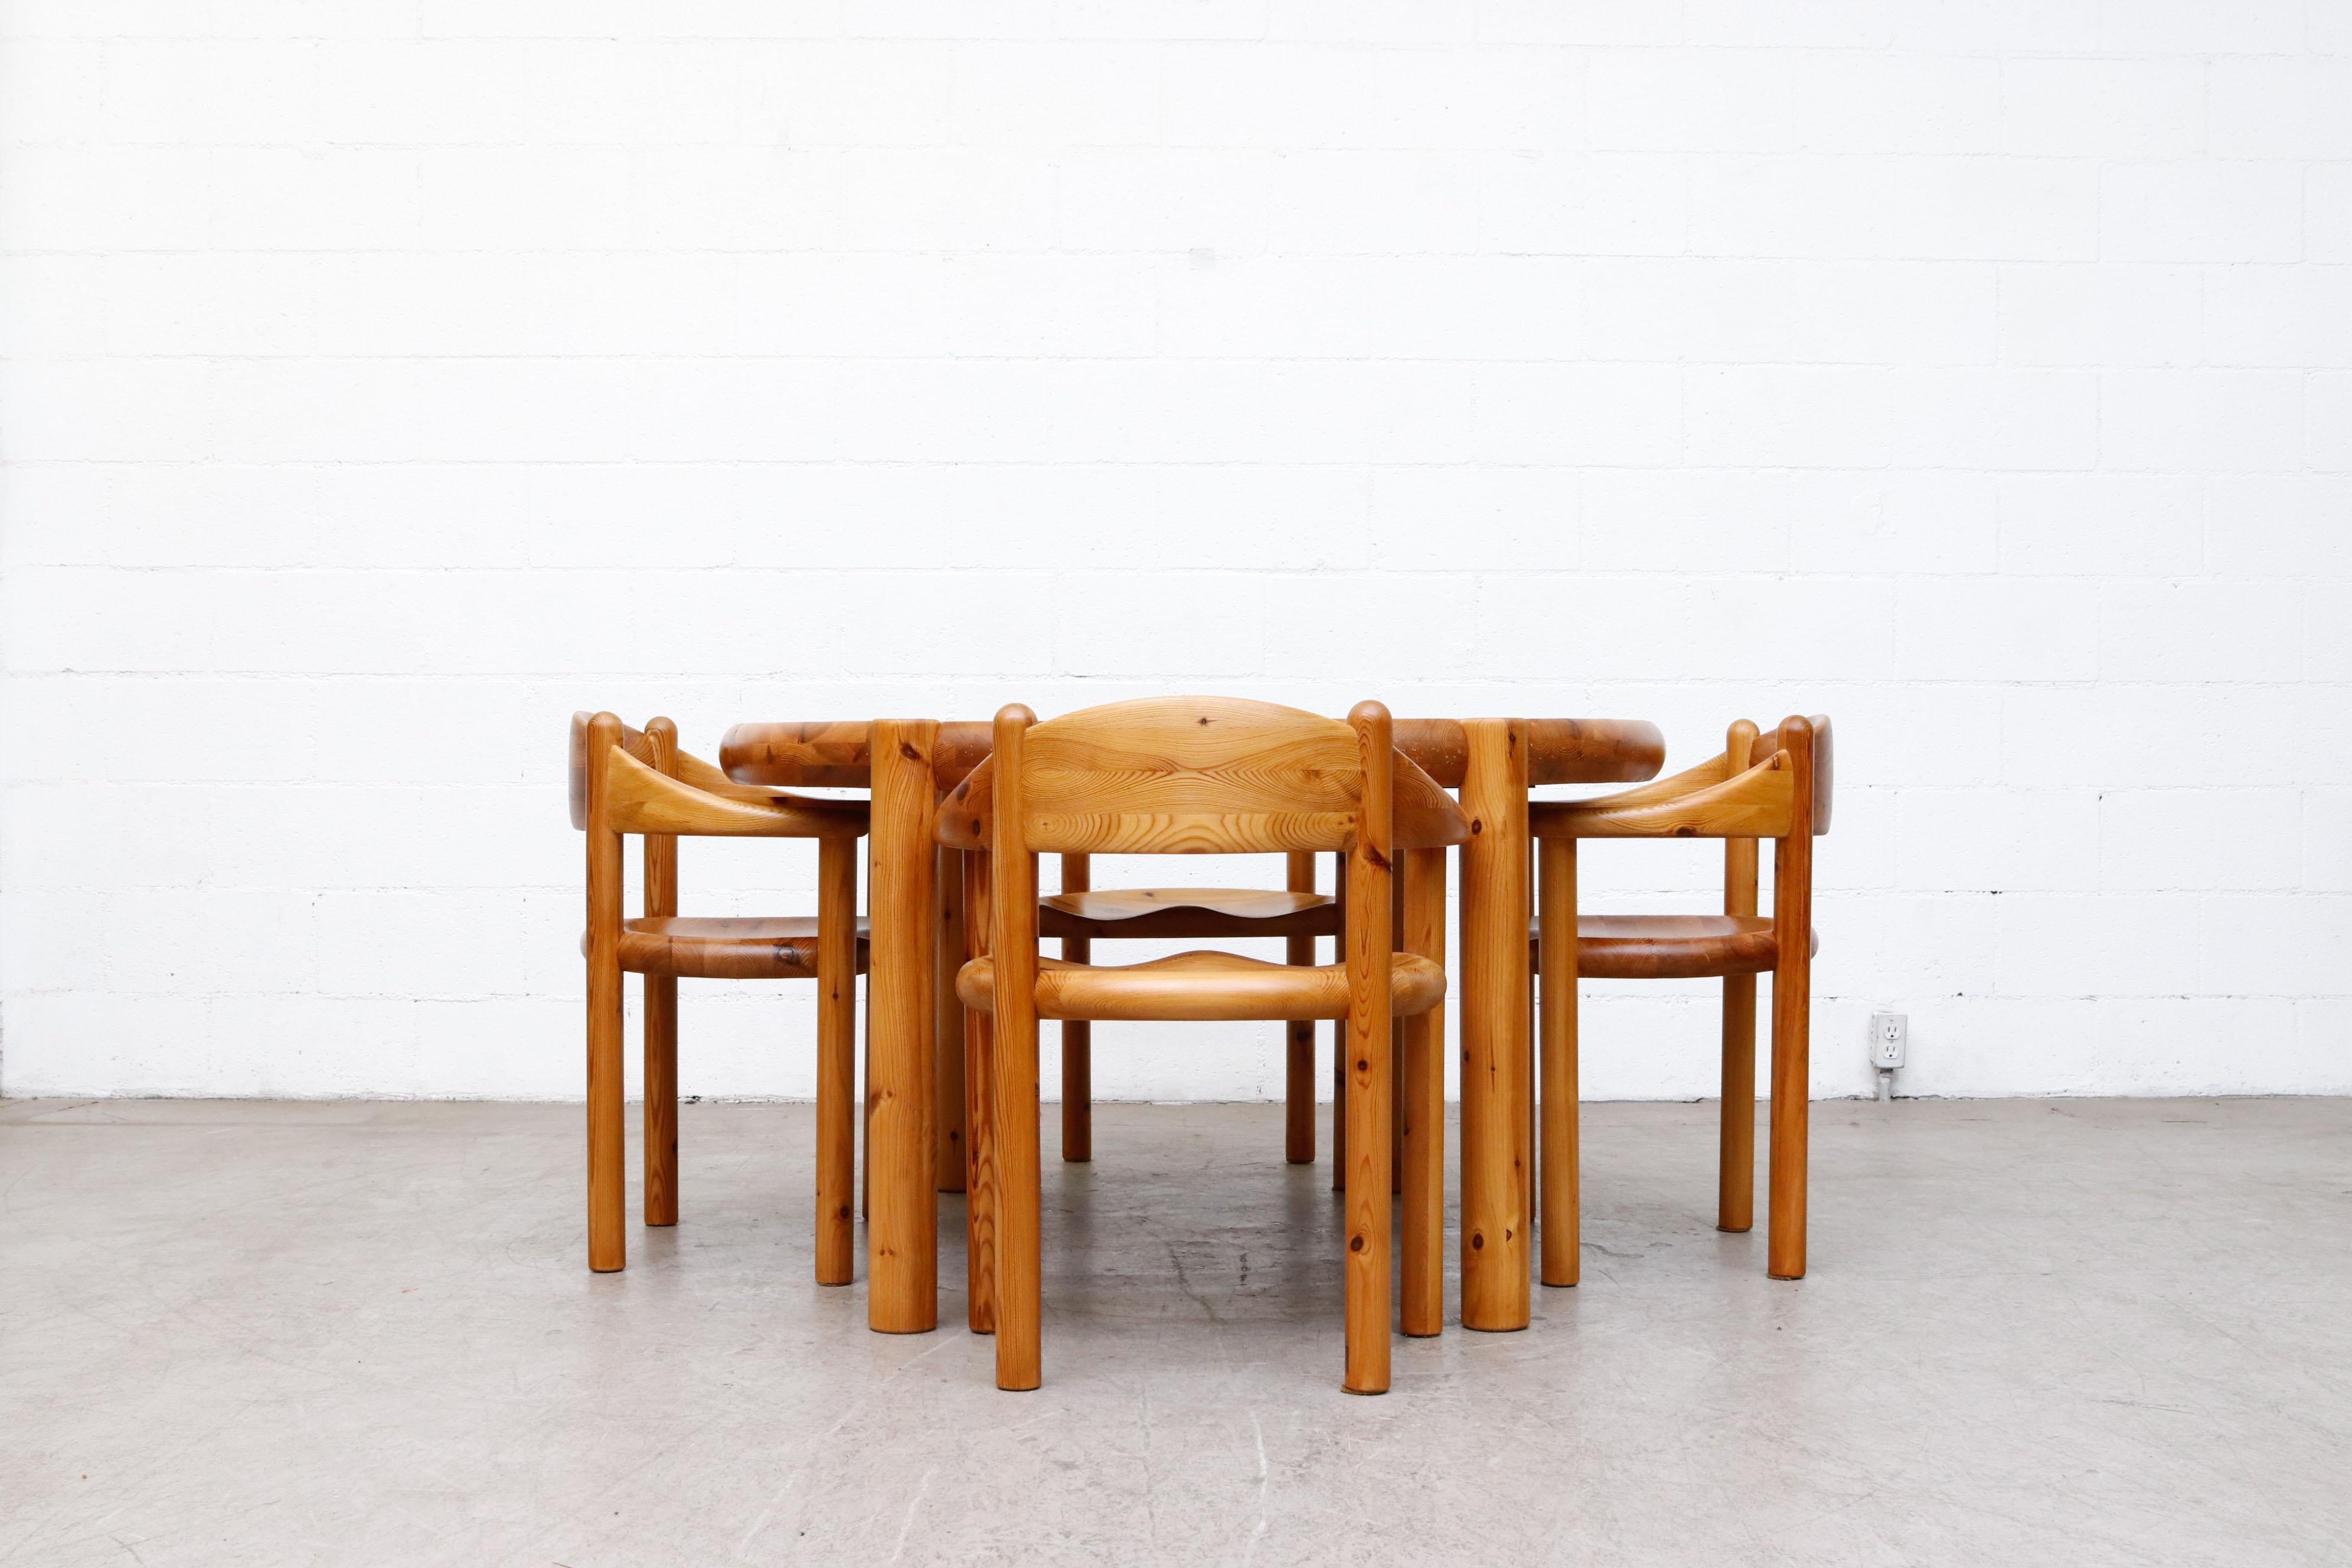 Set of 4 Rainer Daumiller elegantly carved pine dining chairs for Hirtshals Savvaerk. Lightly refinished with wear consistent with their age and use. Set price.